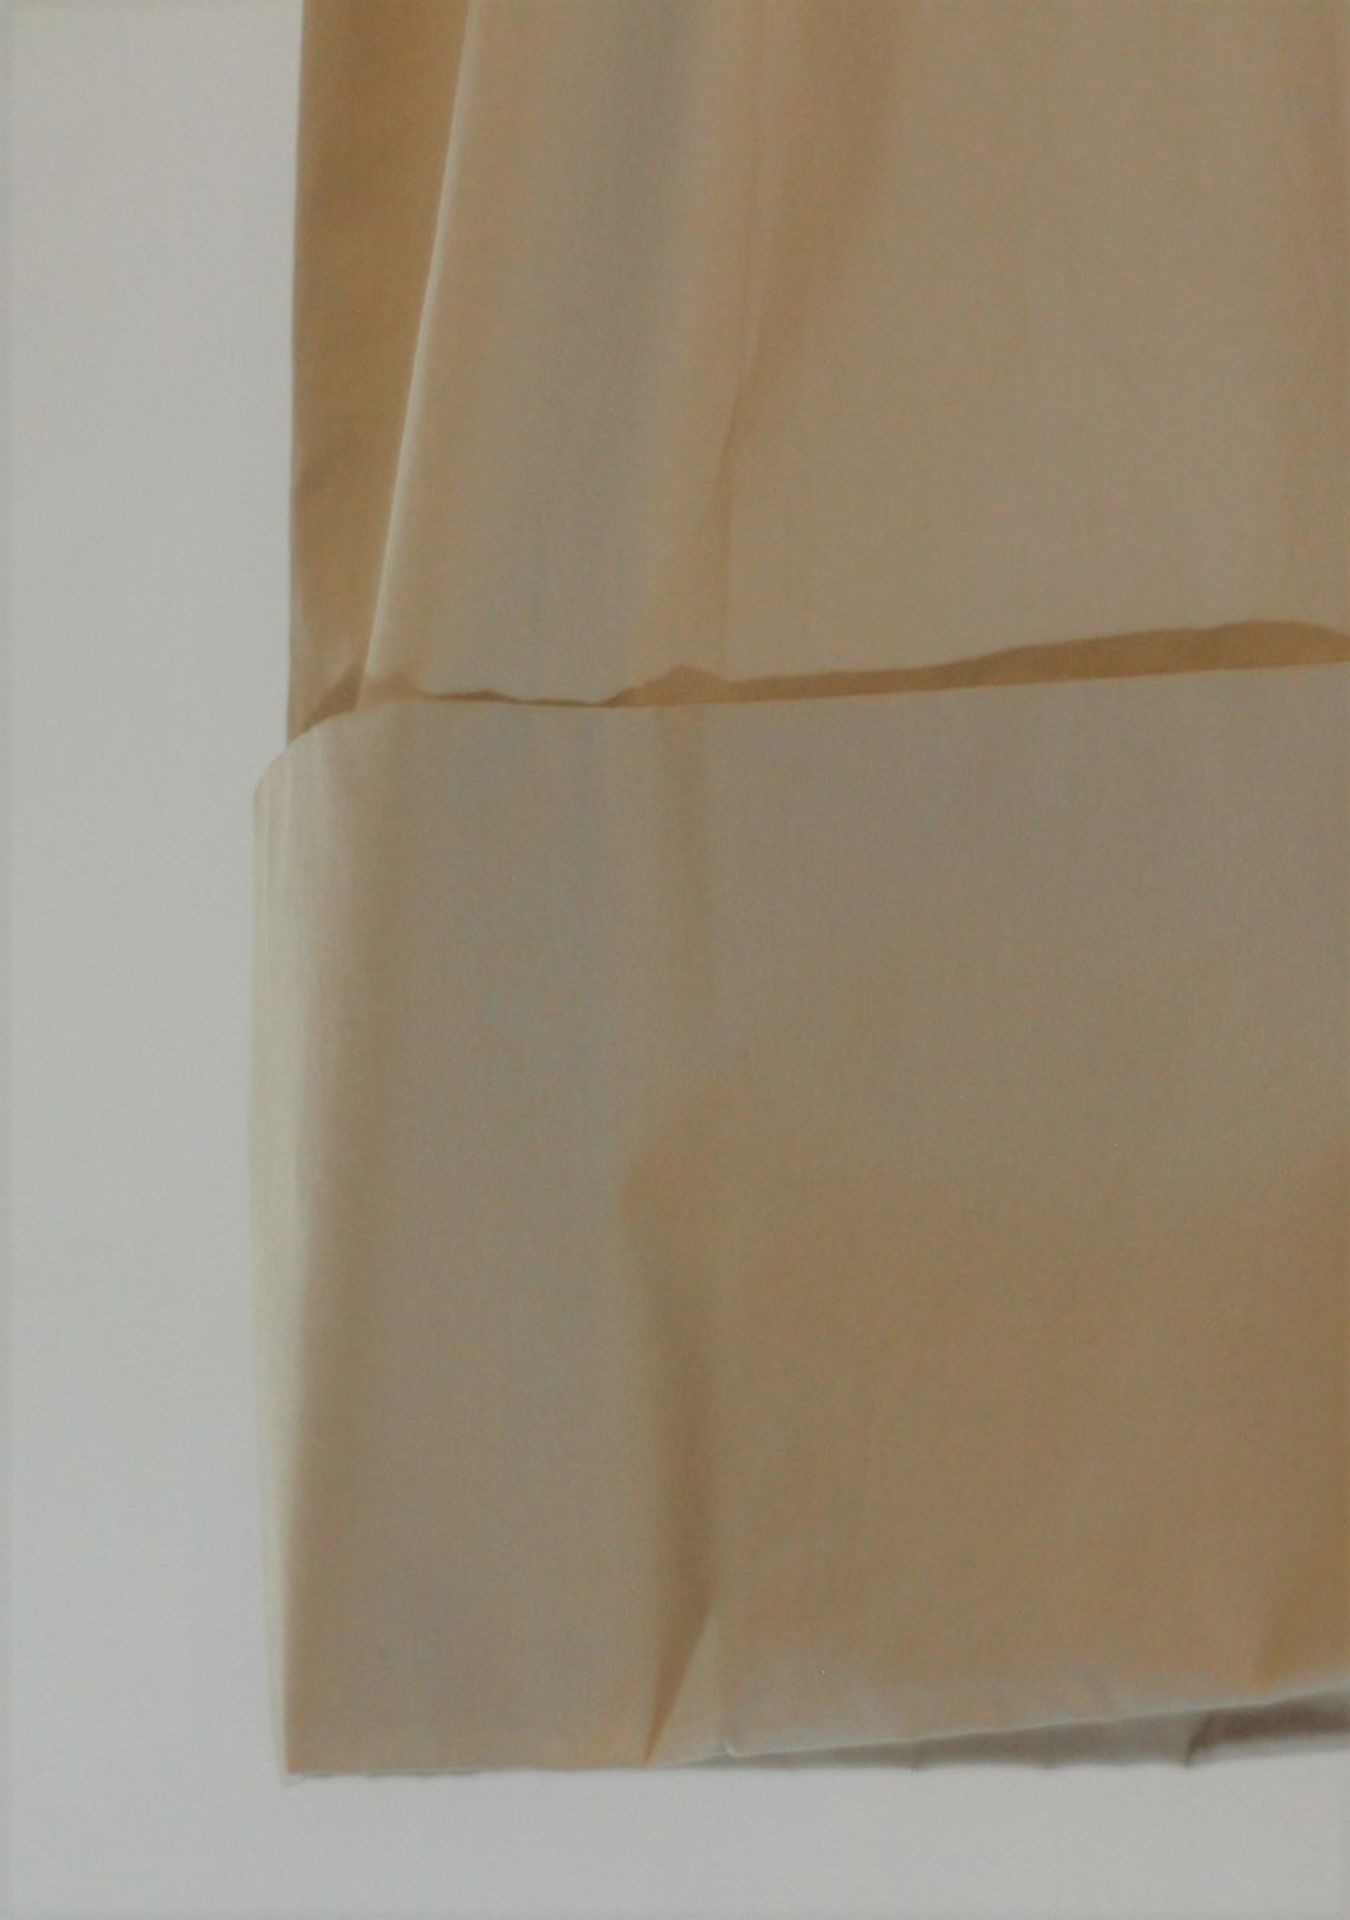 1 x Agnona Beige Trousers - Size: 14 - Material: 97% Cotton, 3% Elastane. Lining 100% Cupro - From a - Image 2 of 8